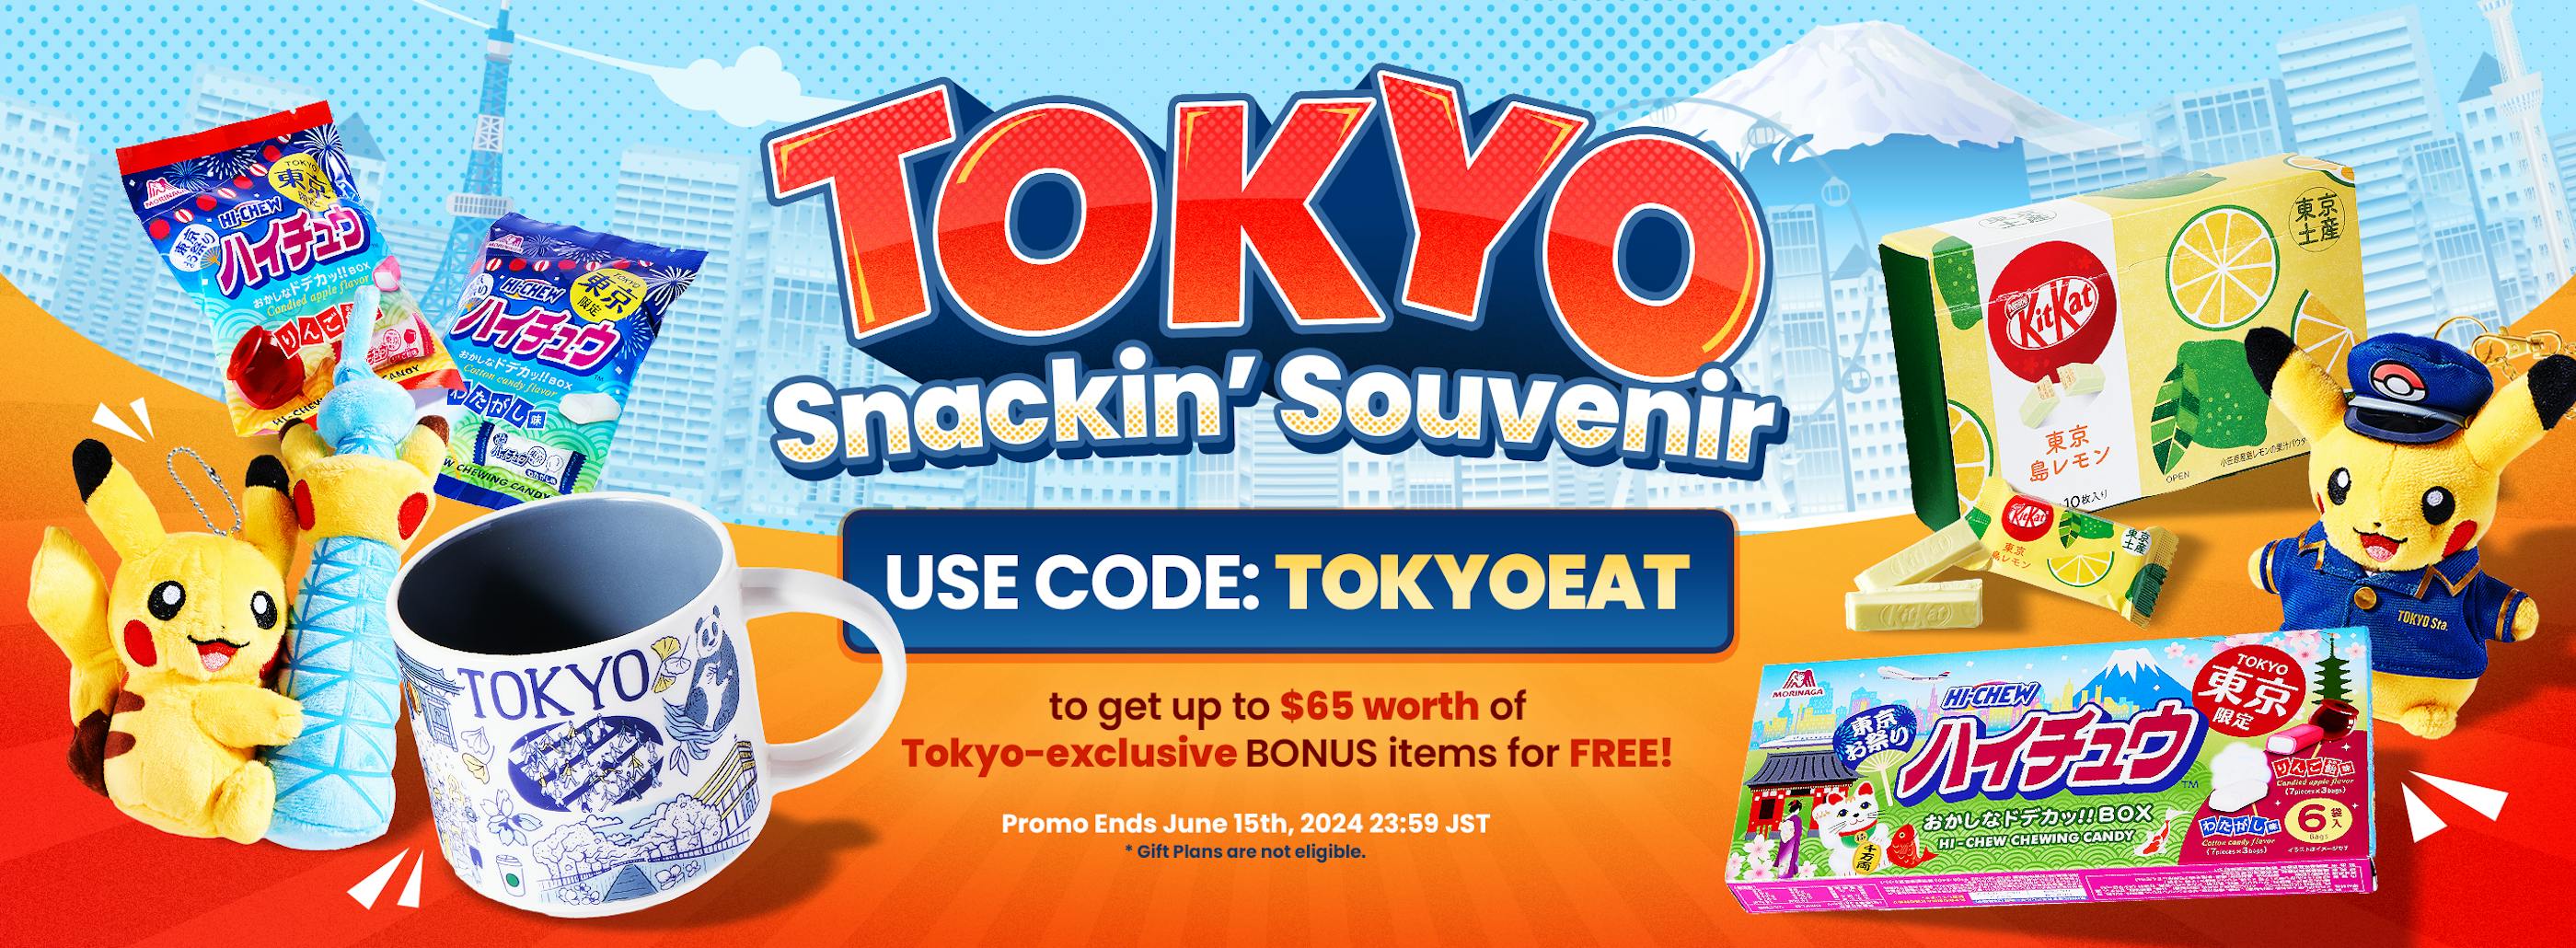 TokyoTreat's Tokyo Snackin' Souvenir promotion with featured Tokyo-exclusive items.